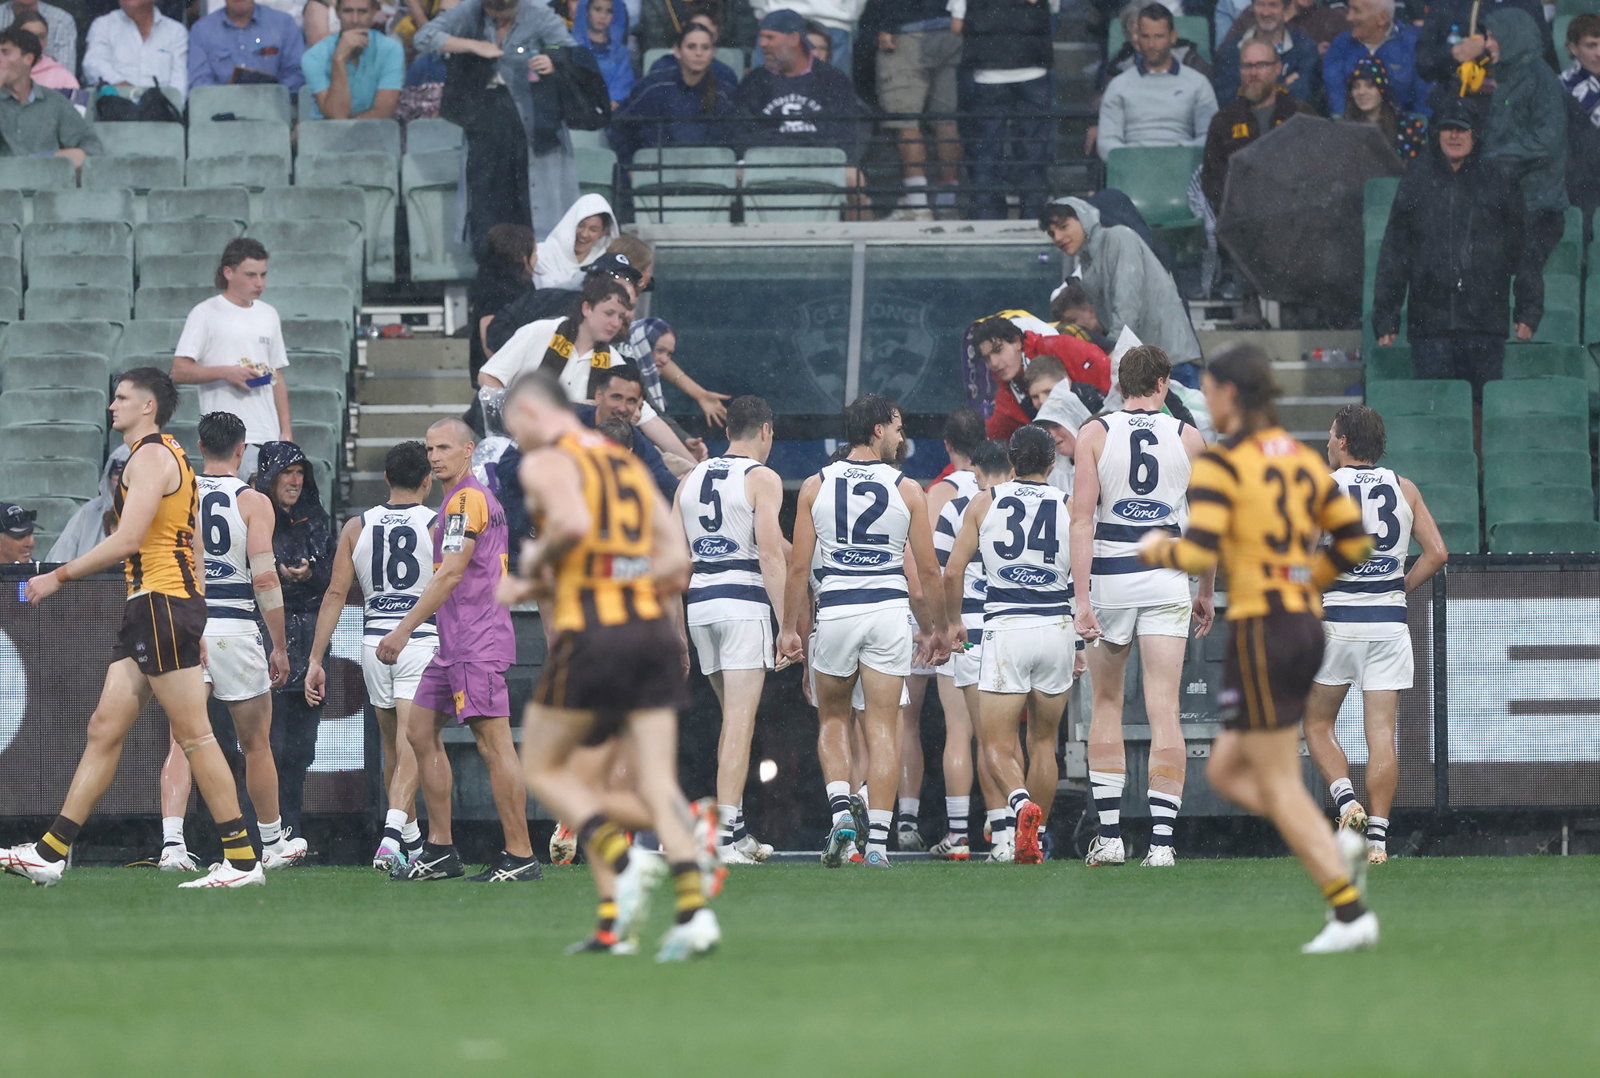 Geelong and Hawthorn players leave the field